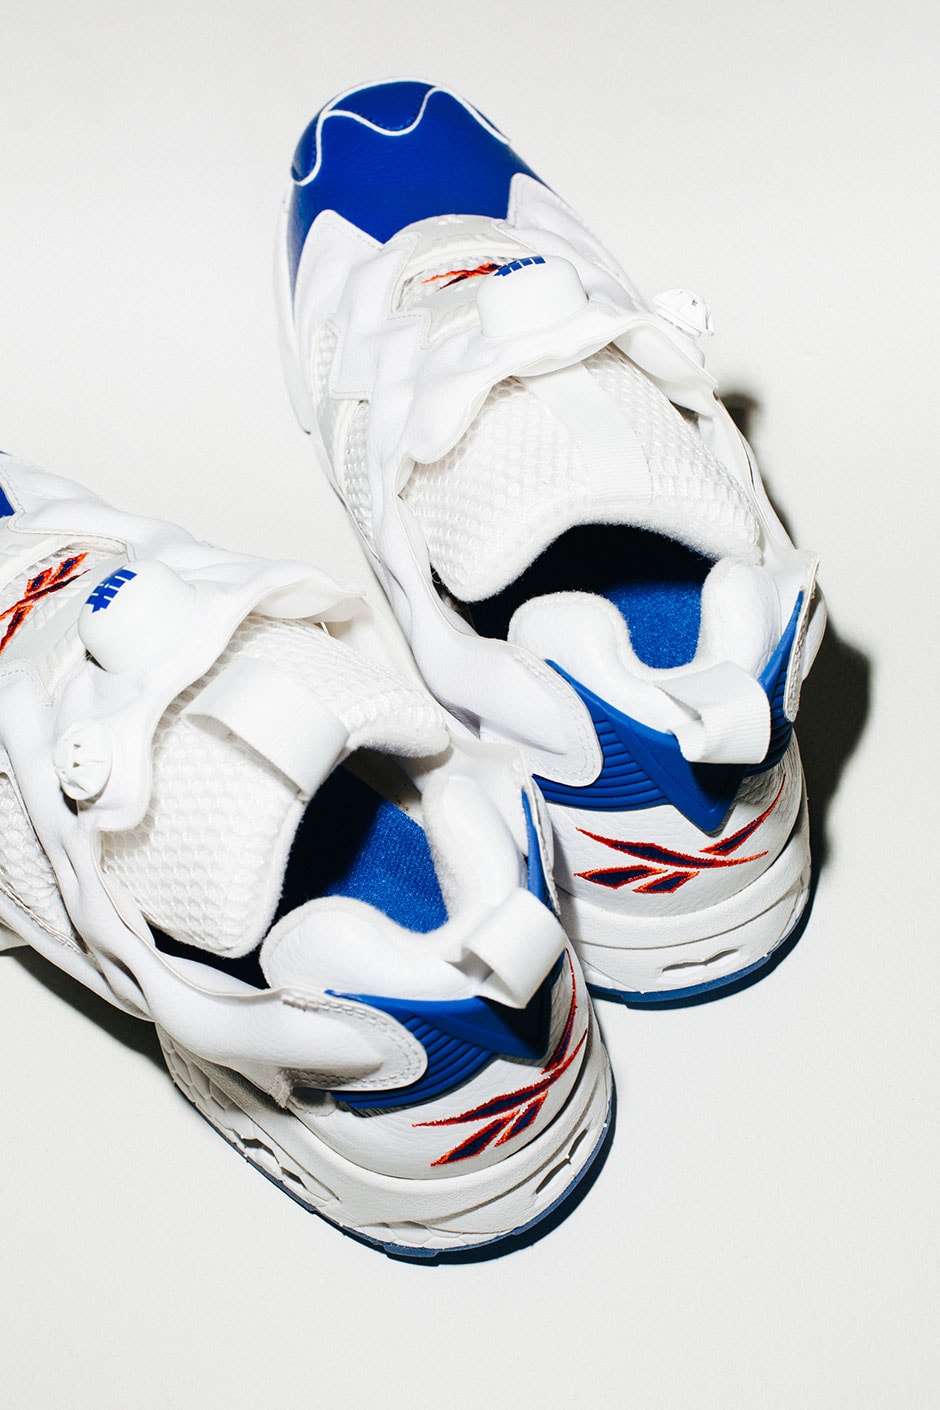 UNDEFEATED Reebok Instapump Fury Allen Iverson Question Collaboration